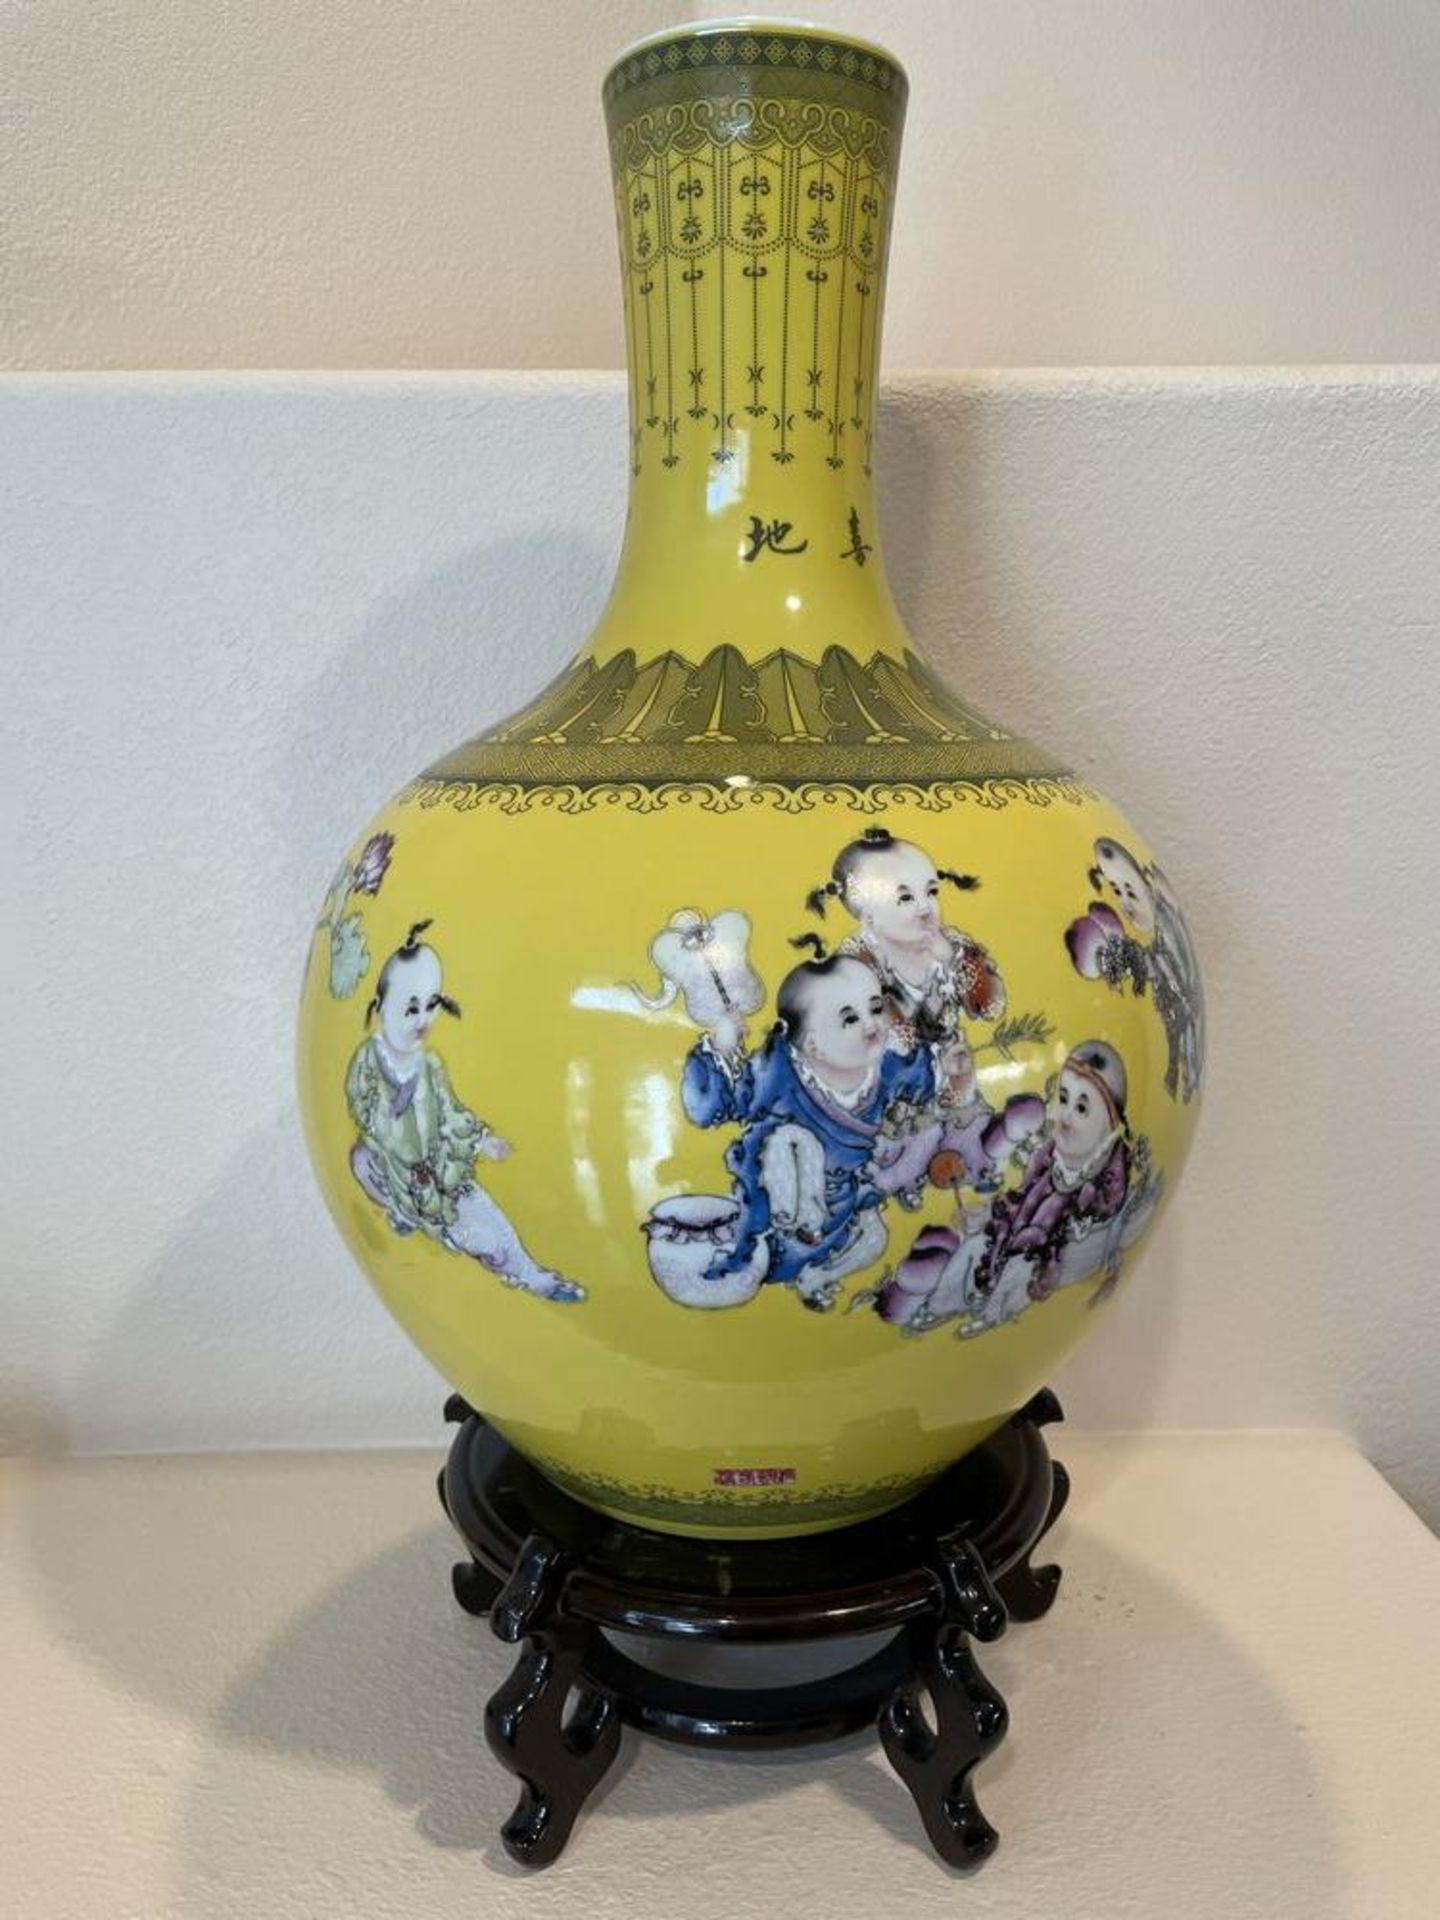 Large Antique East Asian Yellow Urn Vase Porcelin with wood stand - 27" tall x 15" wide